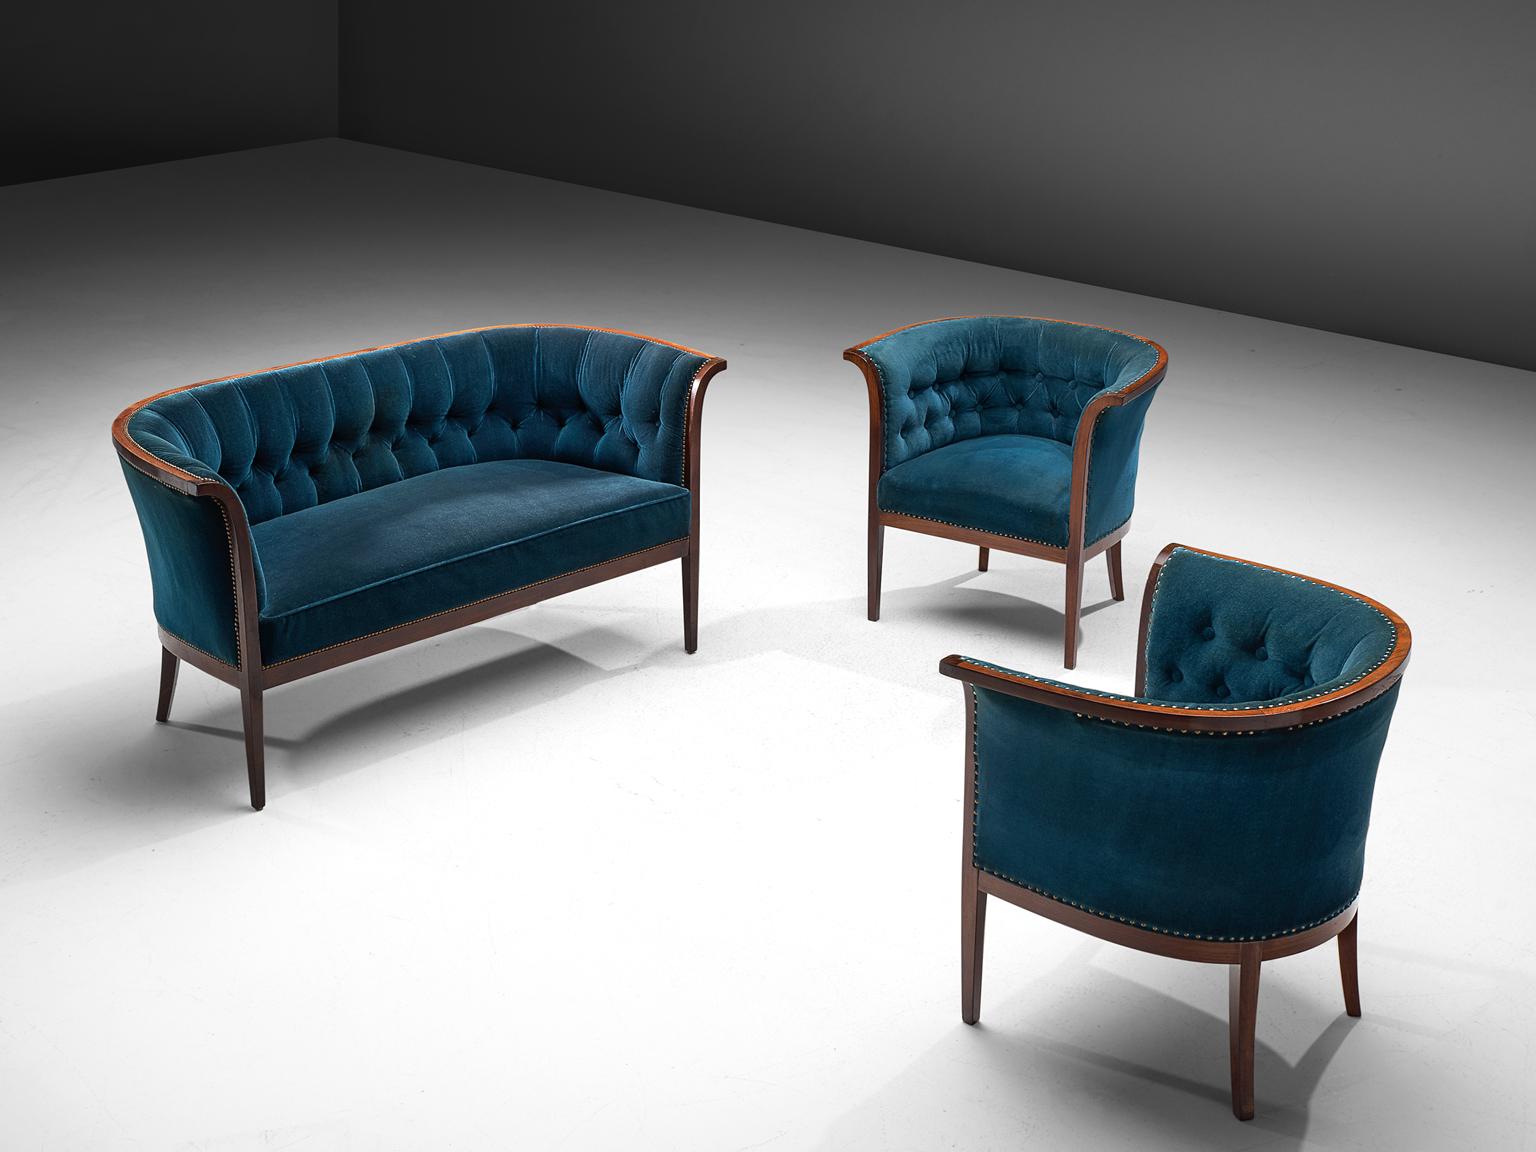 Three-seat sofa and two armchairs, blue velvet upholstery, wood, Denmark, 1940s.

This velvet blue Danish sofa and matching armchairs feature a backrest that is tufted and the seat is executed in one piece. The seat is thick and comfortable. The